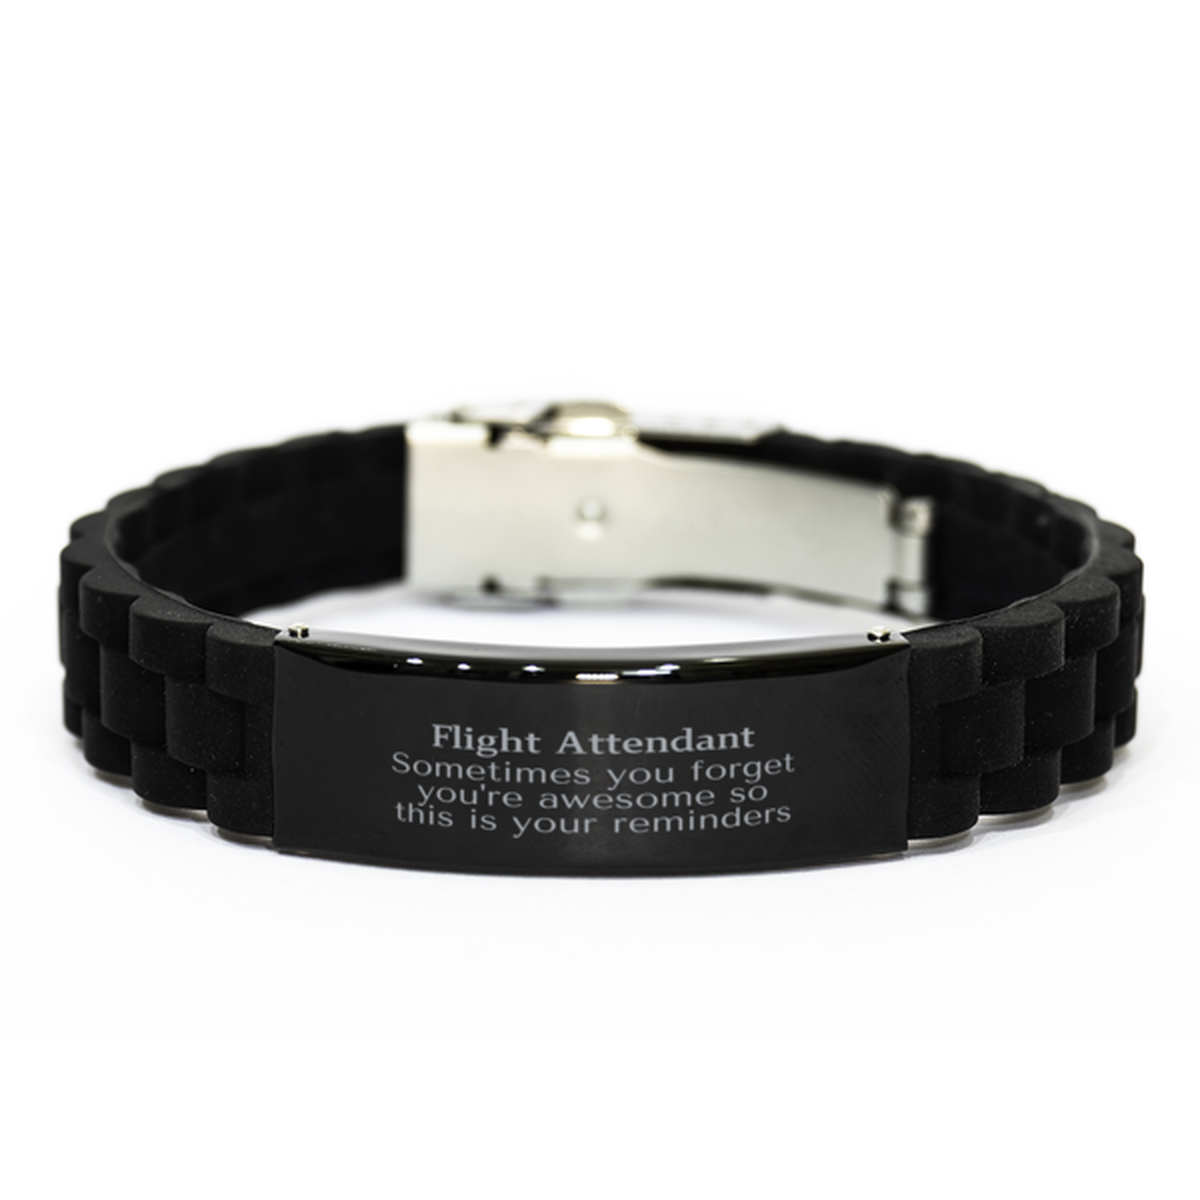 Sentimental Flight Attendant Black Glidelock Clasp Bracelet, Flight Attendant Sometimes you forget you're awesome so this is your reminders, Graduation Christmas Birthday Gifts for Flight Attendant, Men, Women, Coworkers